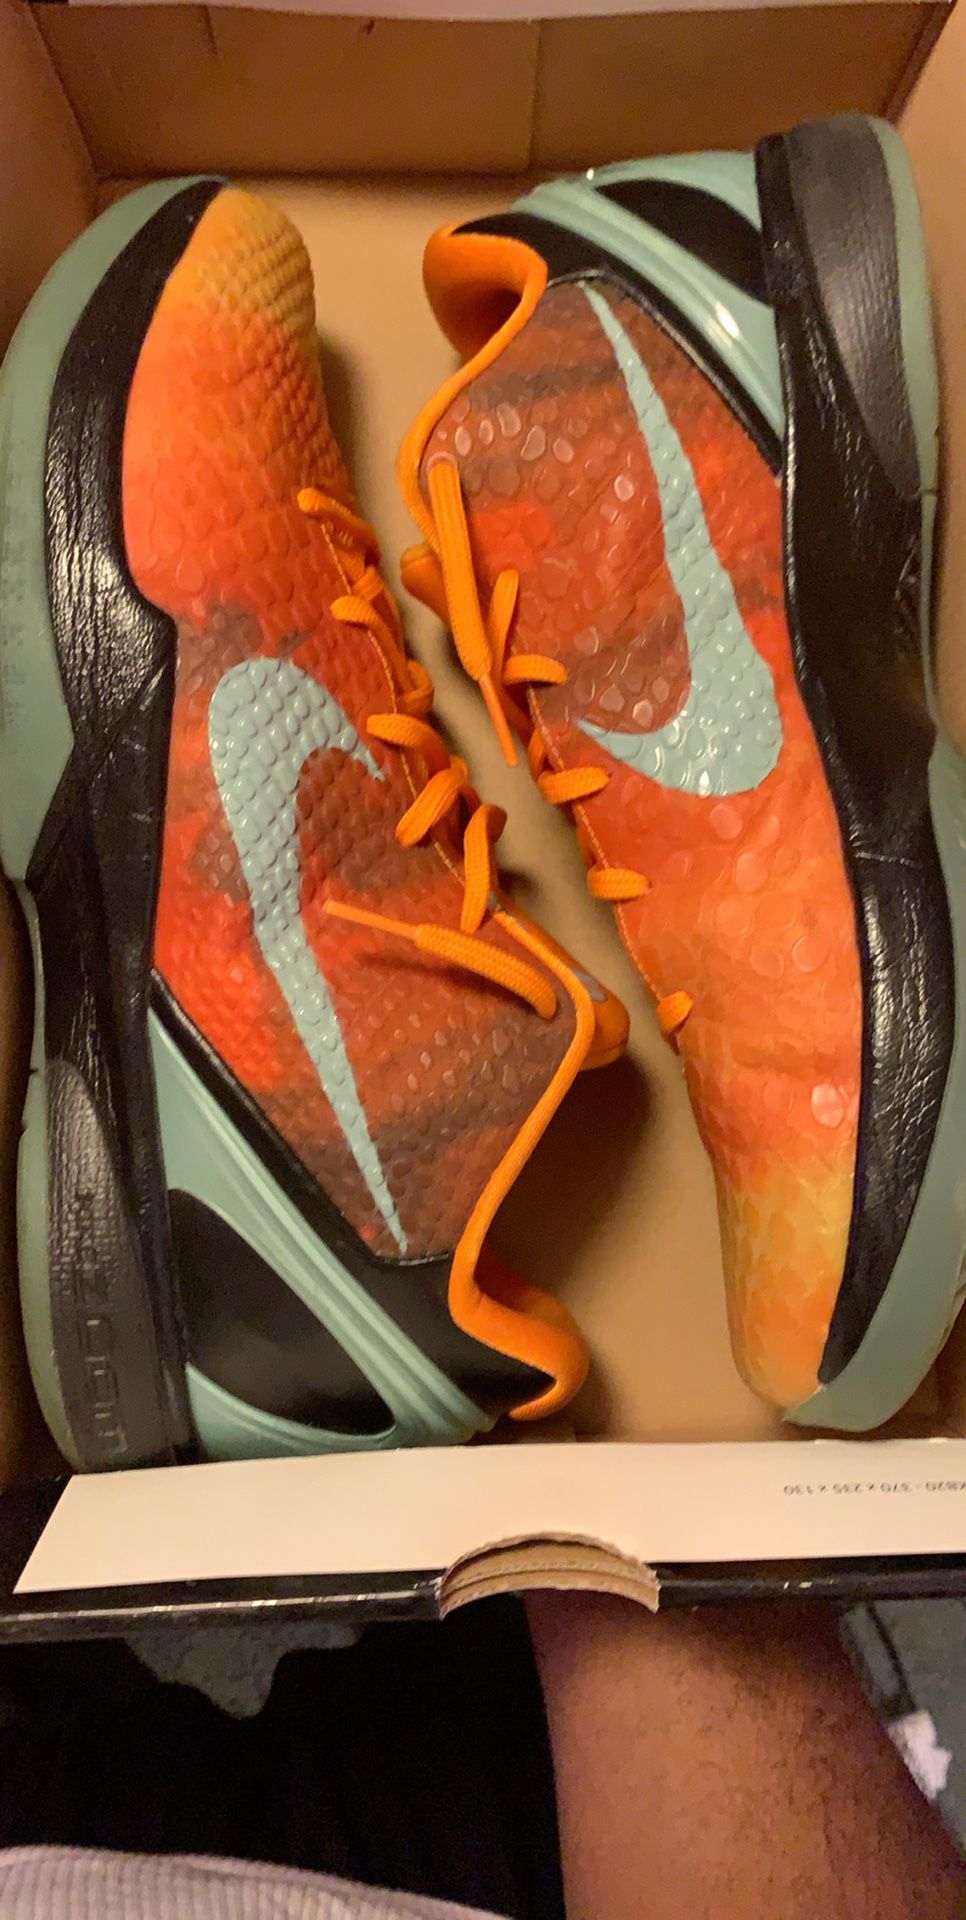 Size 13 Kobe “ASG Orange County” I will be postponing selling due to the tragic death of Kobe yesterday..